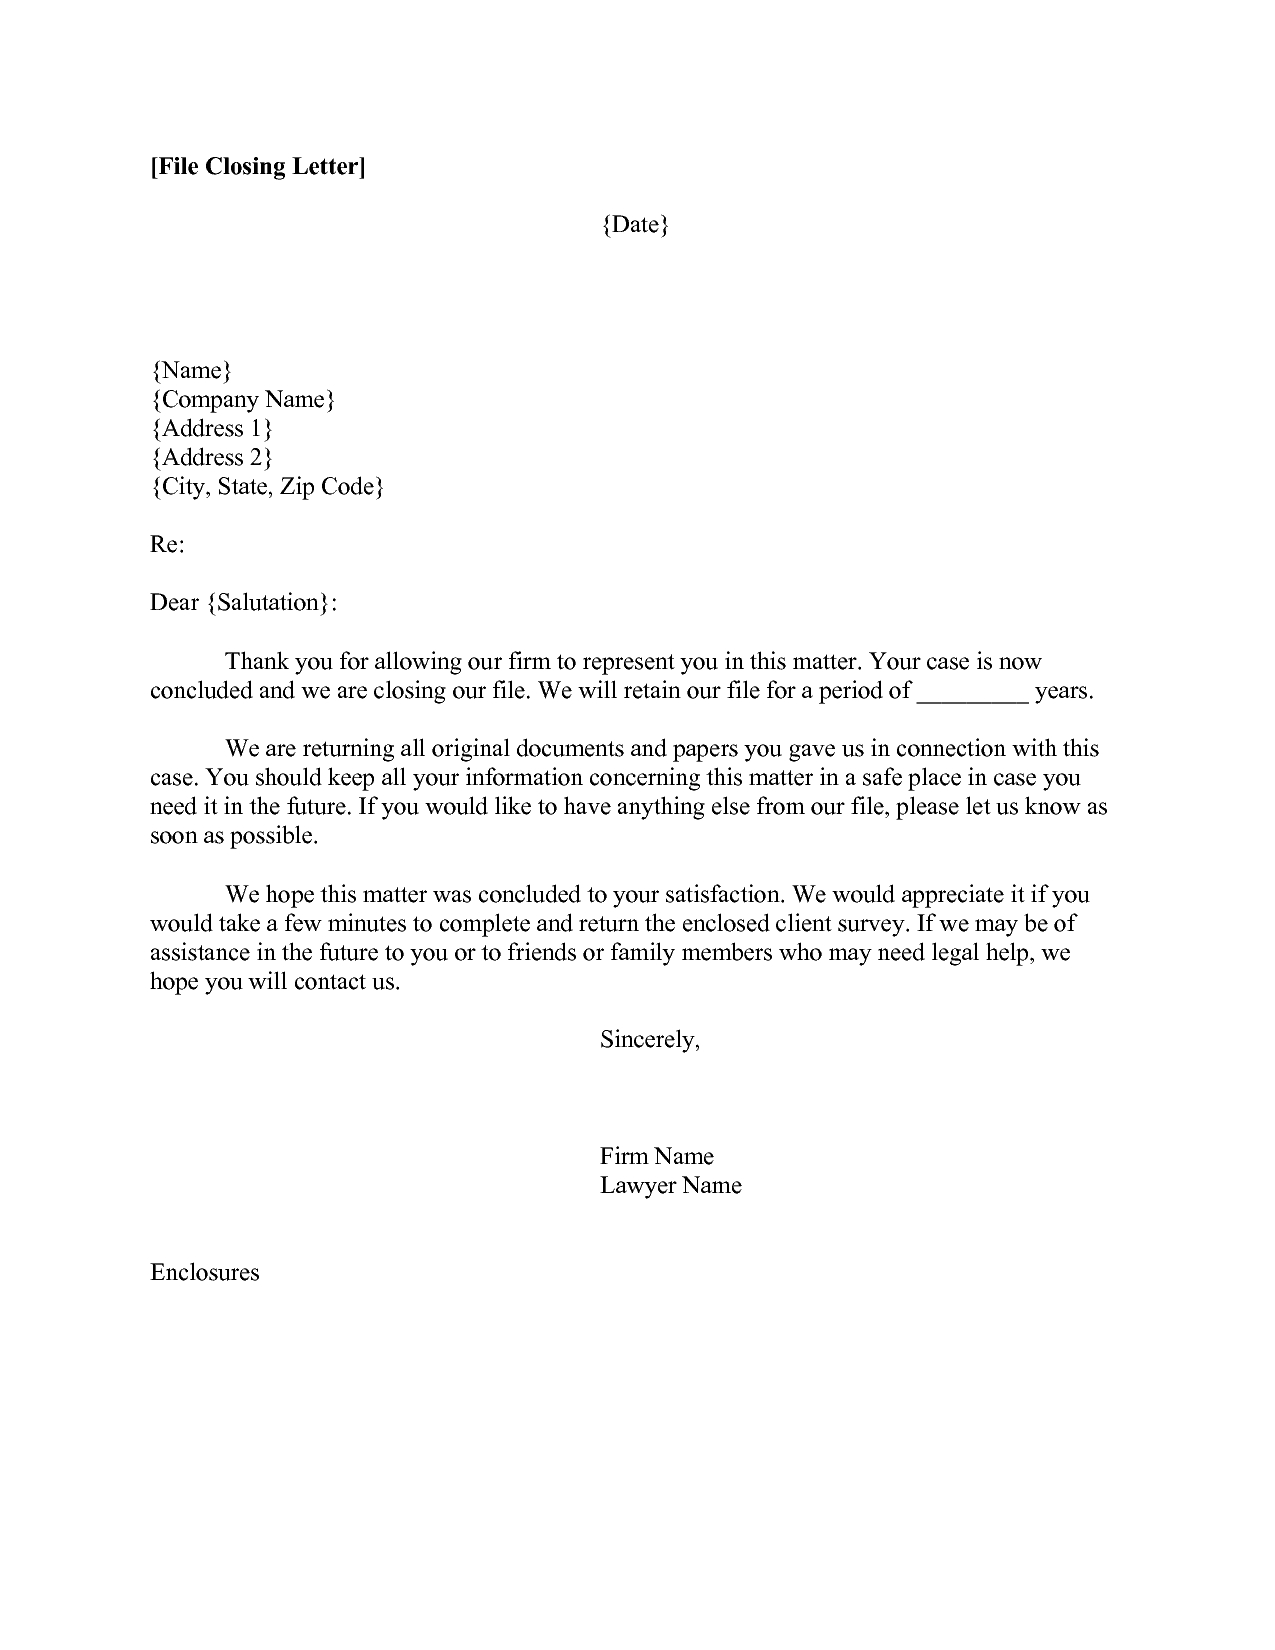 Formal Business Letter Closing from scrumpscupcakes.com